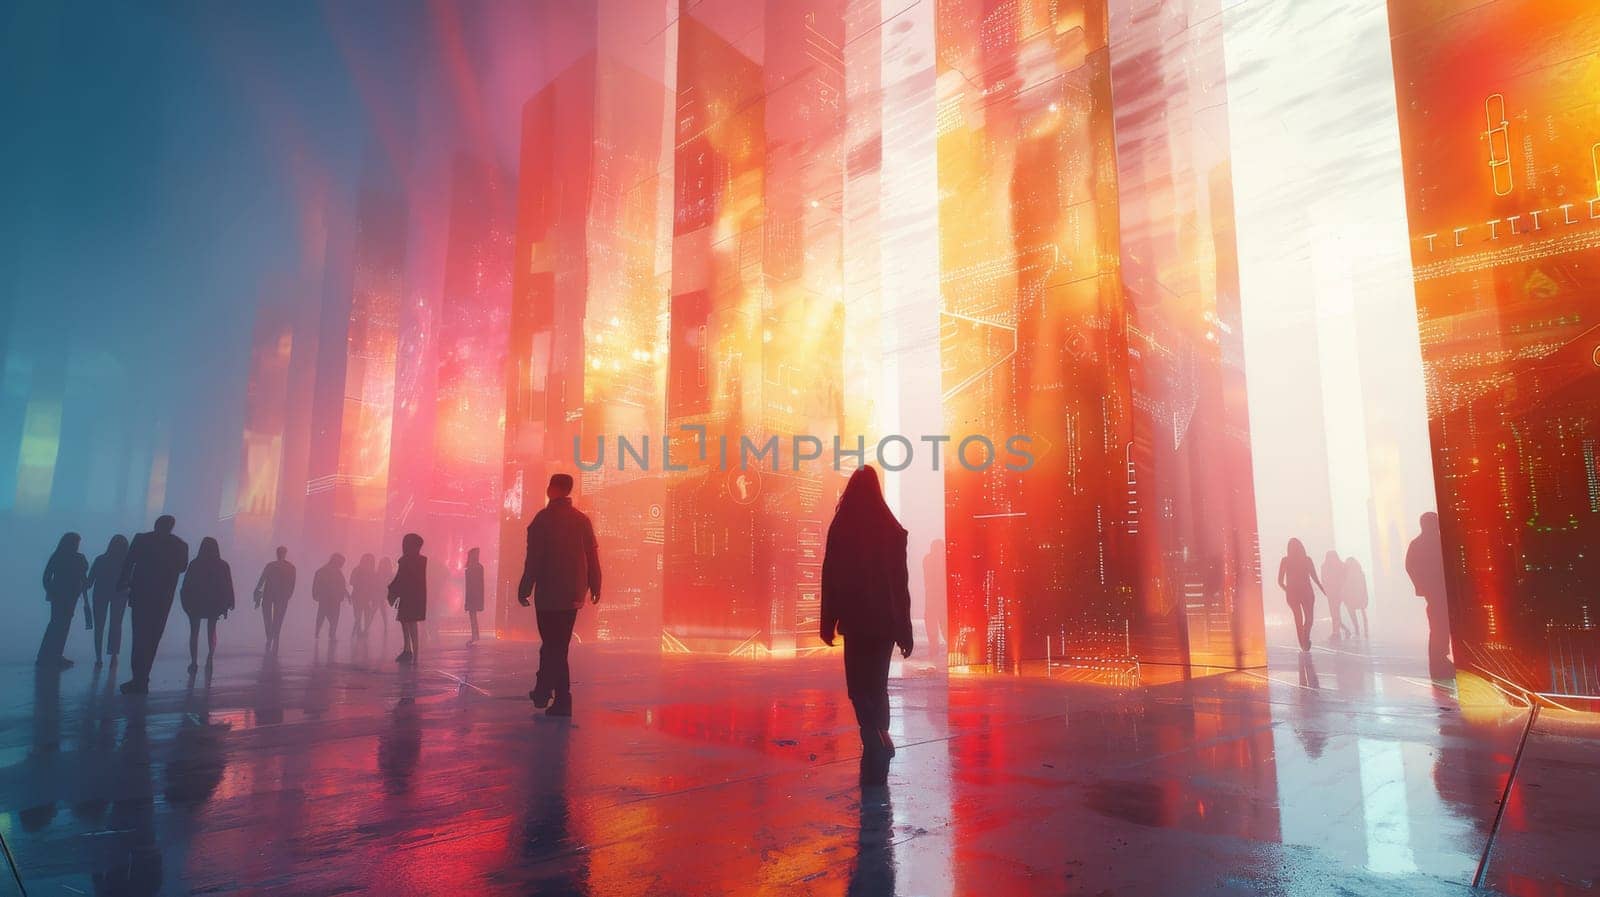 A group of people walking in a city with a bright orange sky. Scene is lively and energetic